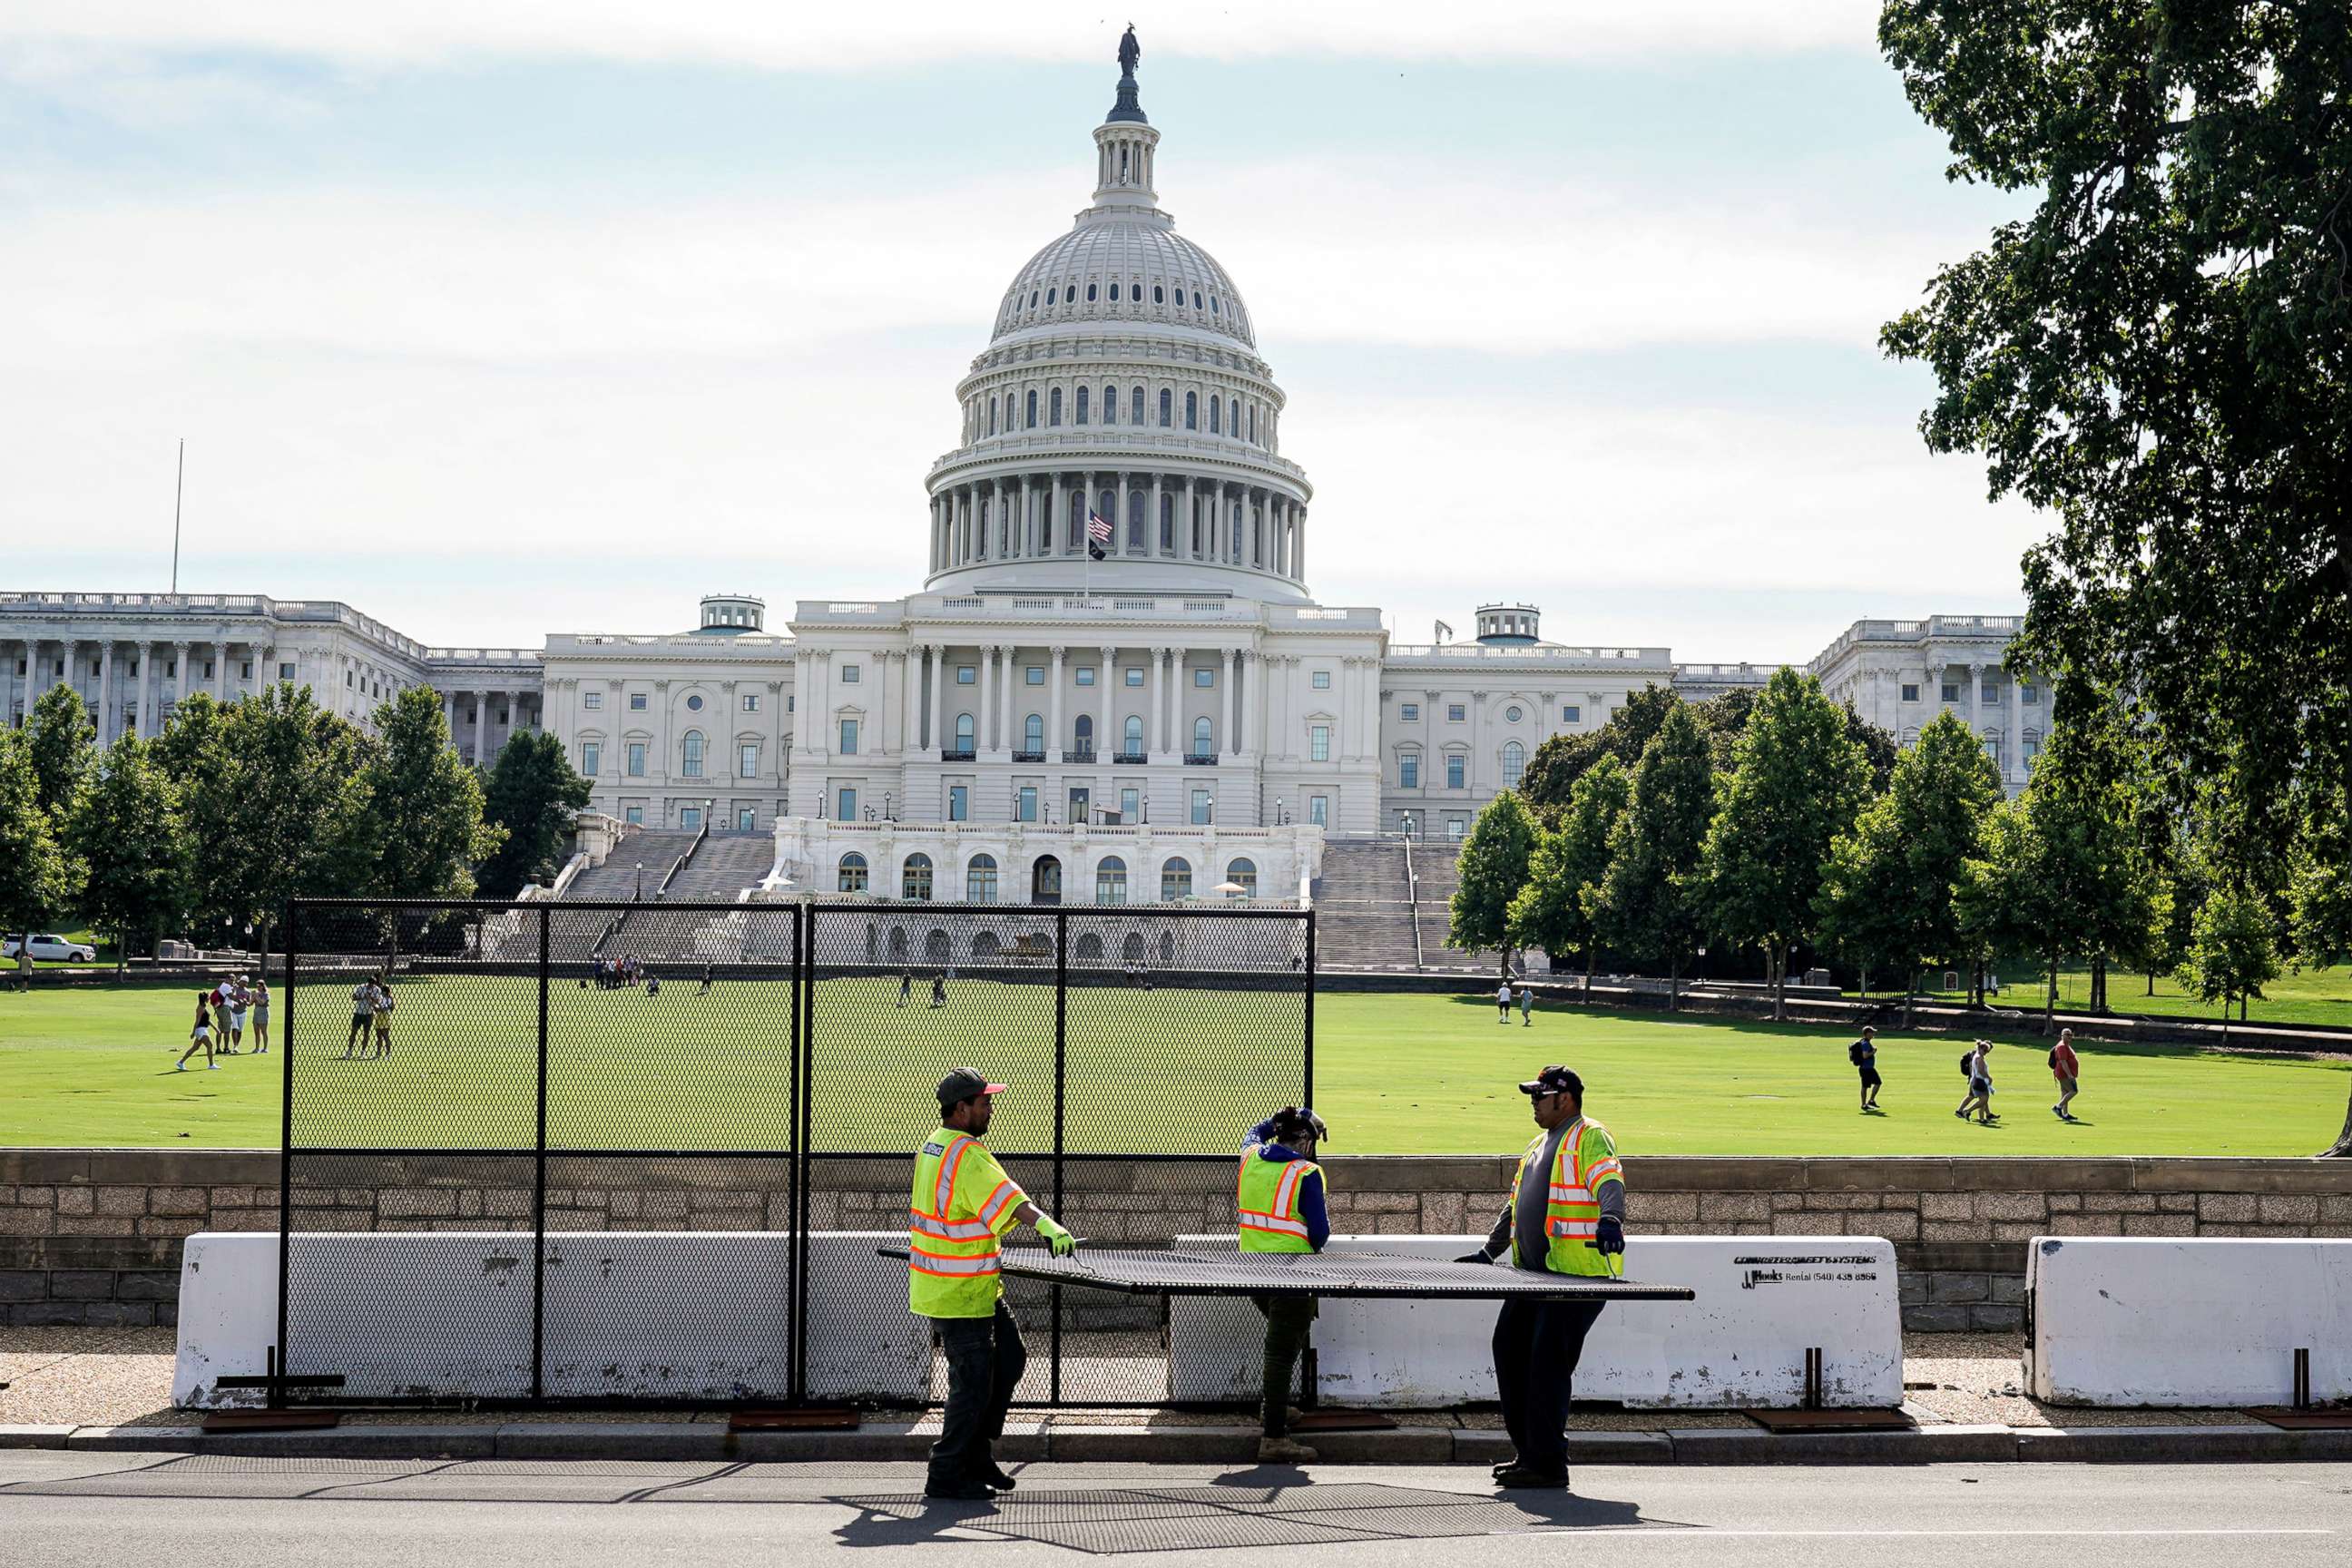 PHOTO: Workers remove security fencing as a reduction in heightened security measures  after the January 6th attack on the Capitol, July 10, 2021.